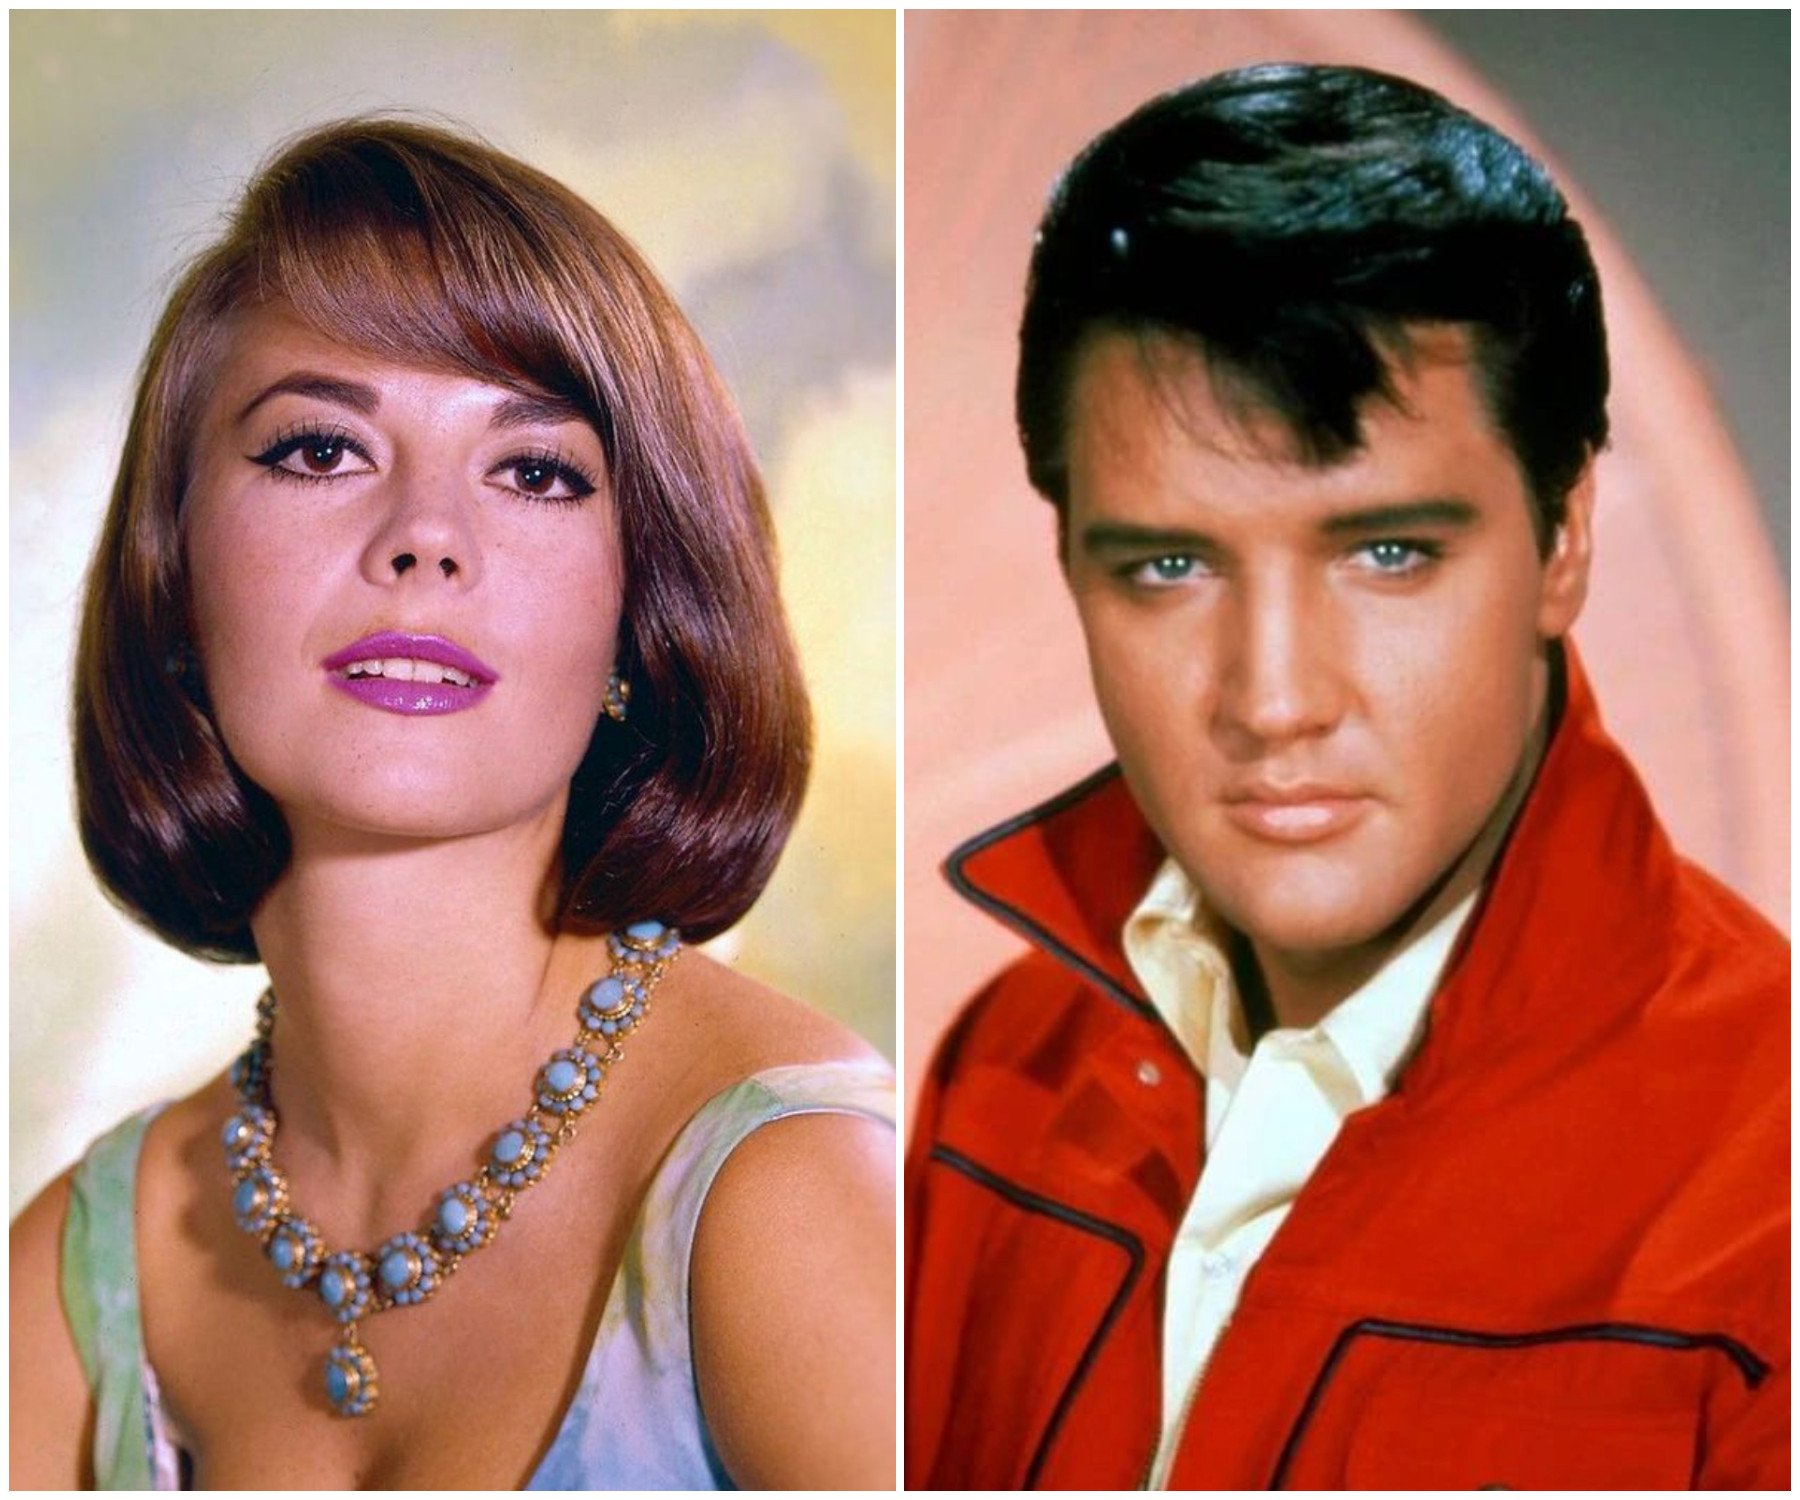 Actress Natalie Wood was a screen icon who dated several famous men including Elvis, but died in tragic and still mysterious circumstances. Photos: @nataliewood, @elvis_presley___fans/Instagram